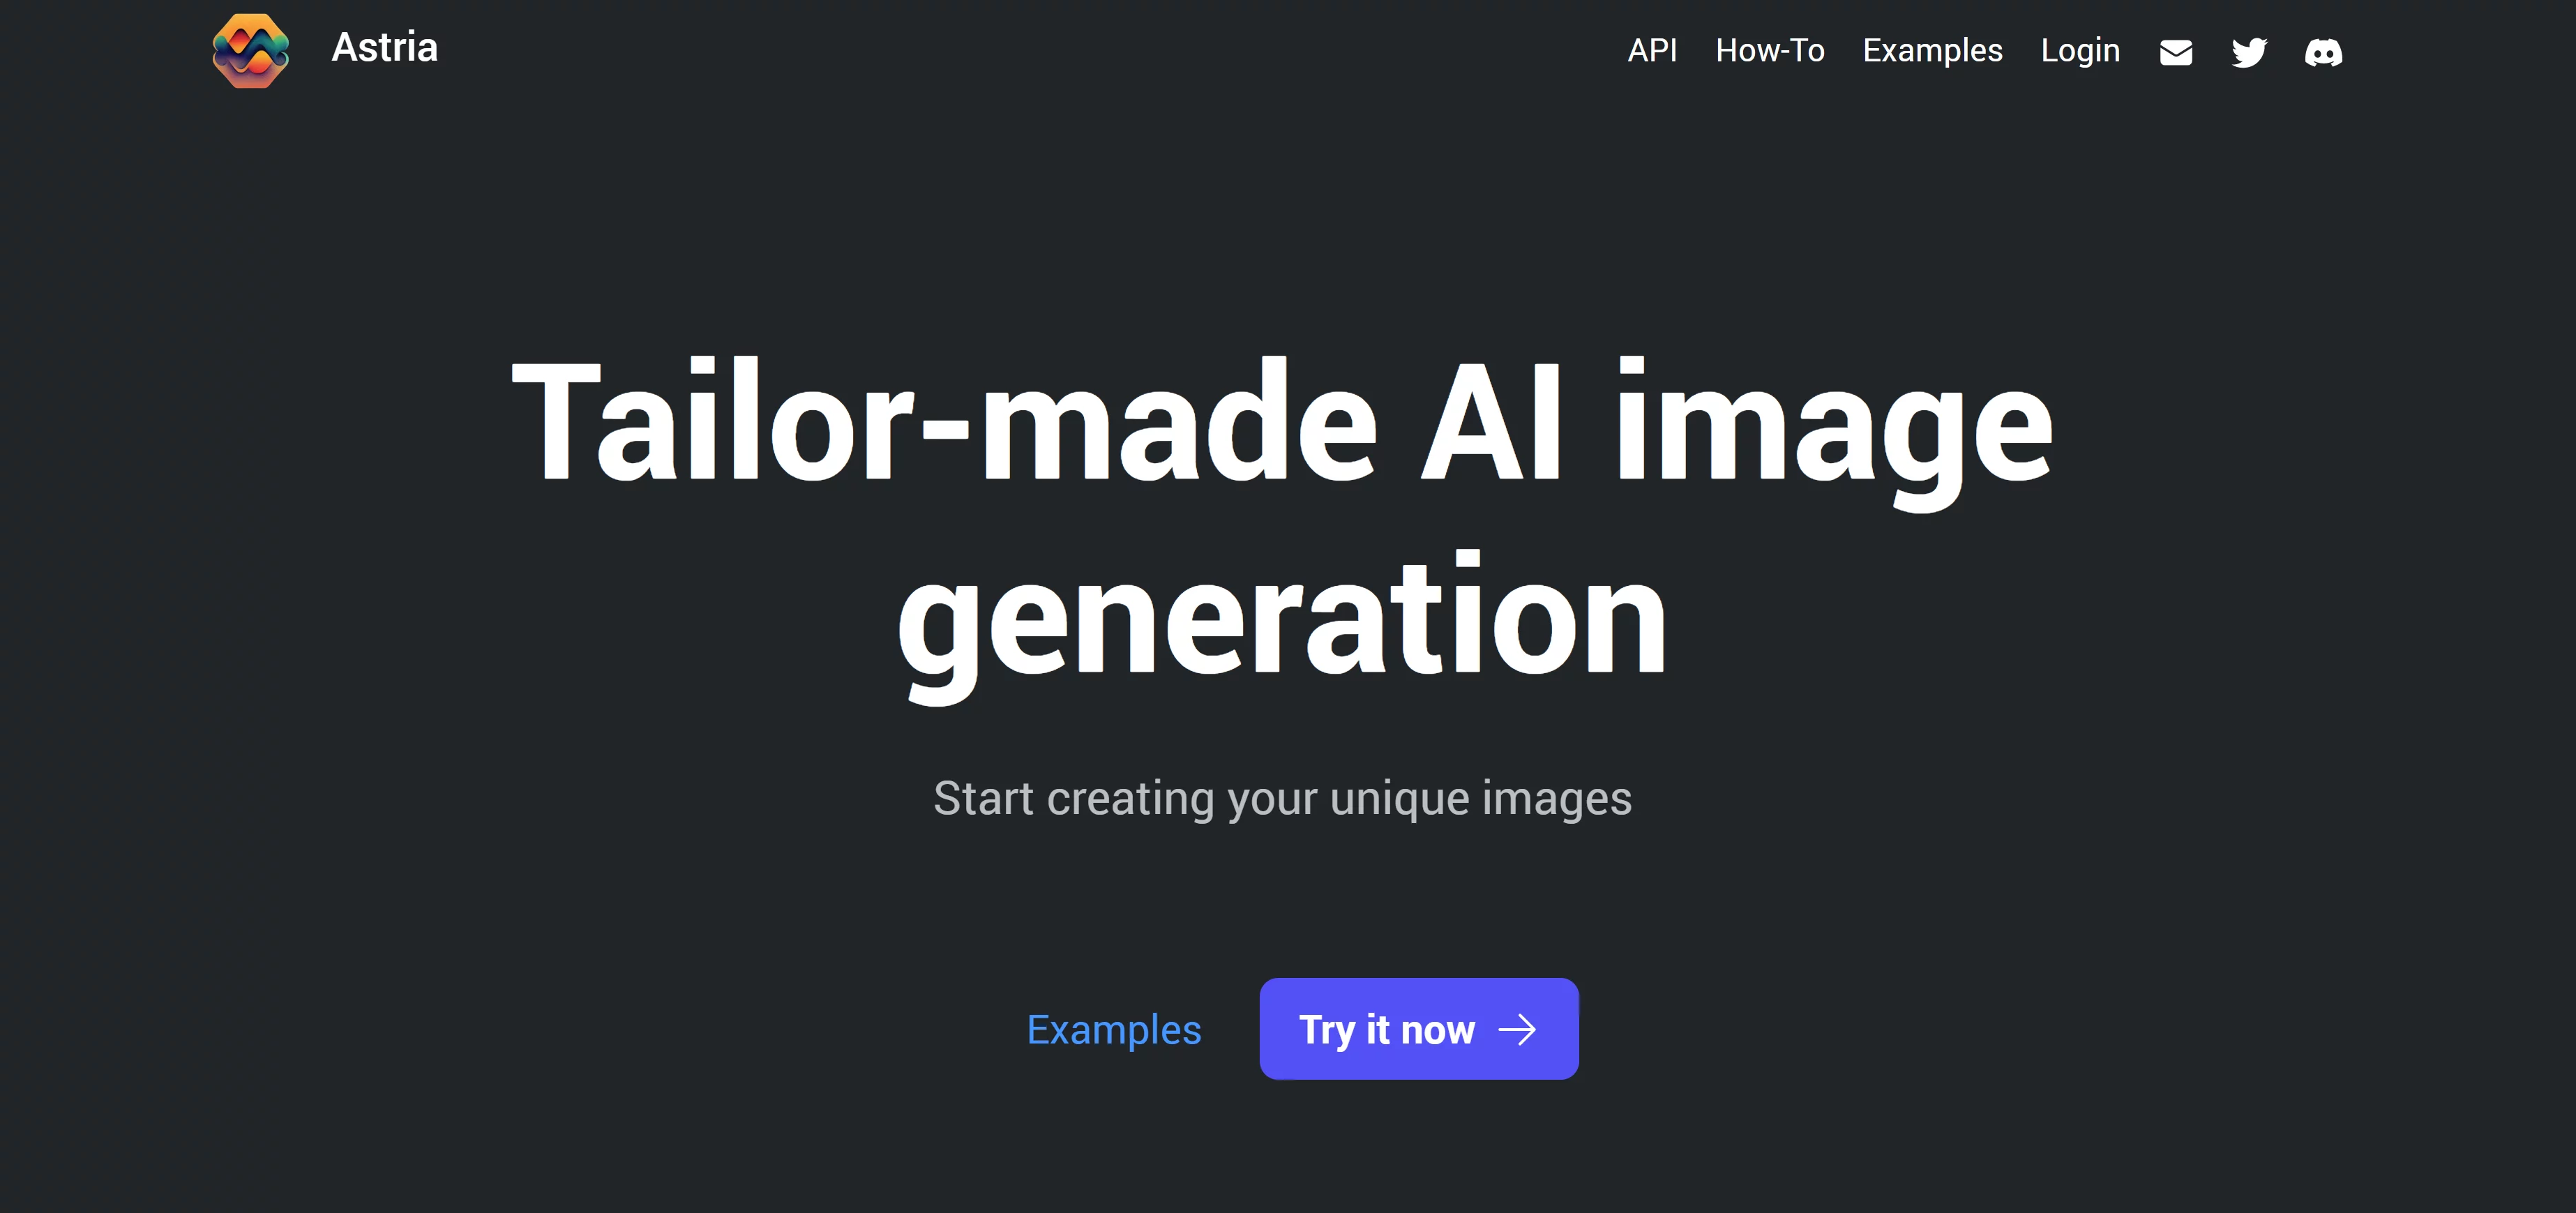  Create unique images with AI tailored to you.